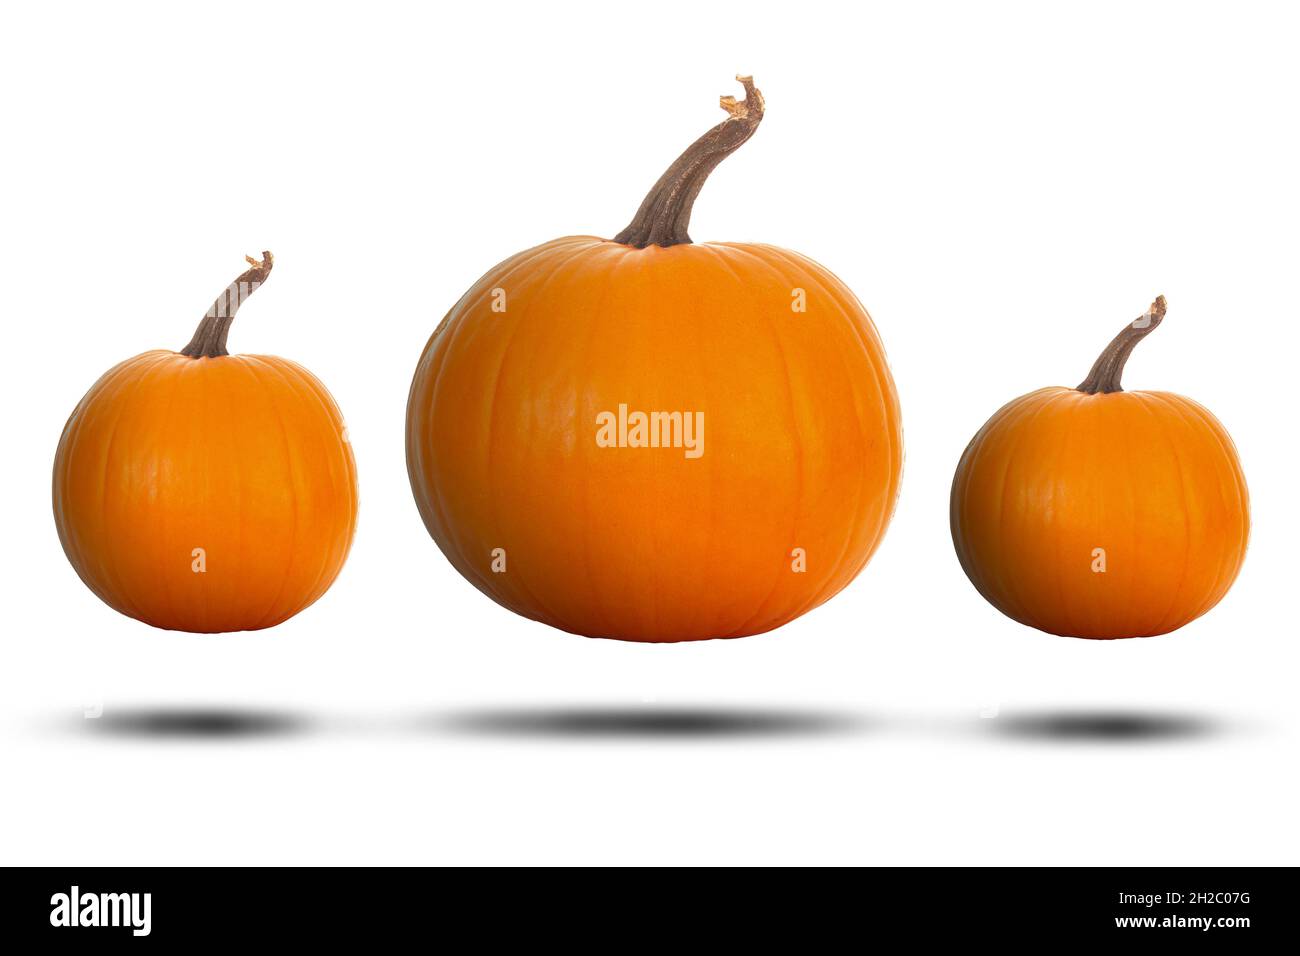 Big orange halloween pumpkins isolated on a white background, floating with a shadow. Stock Photo